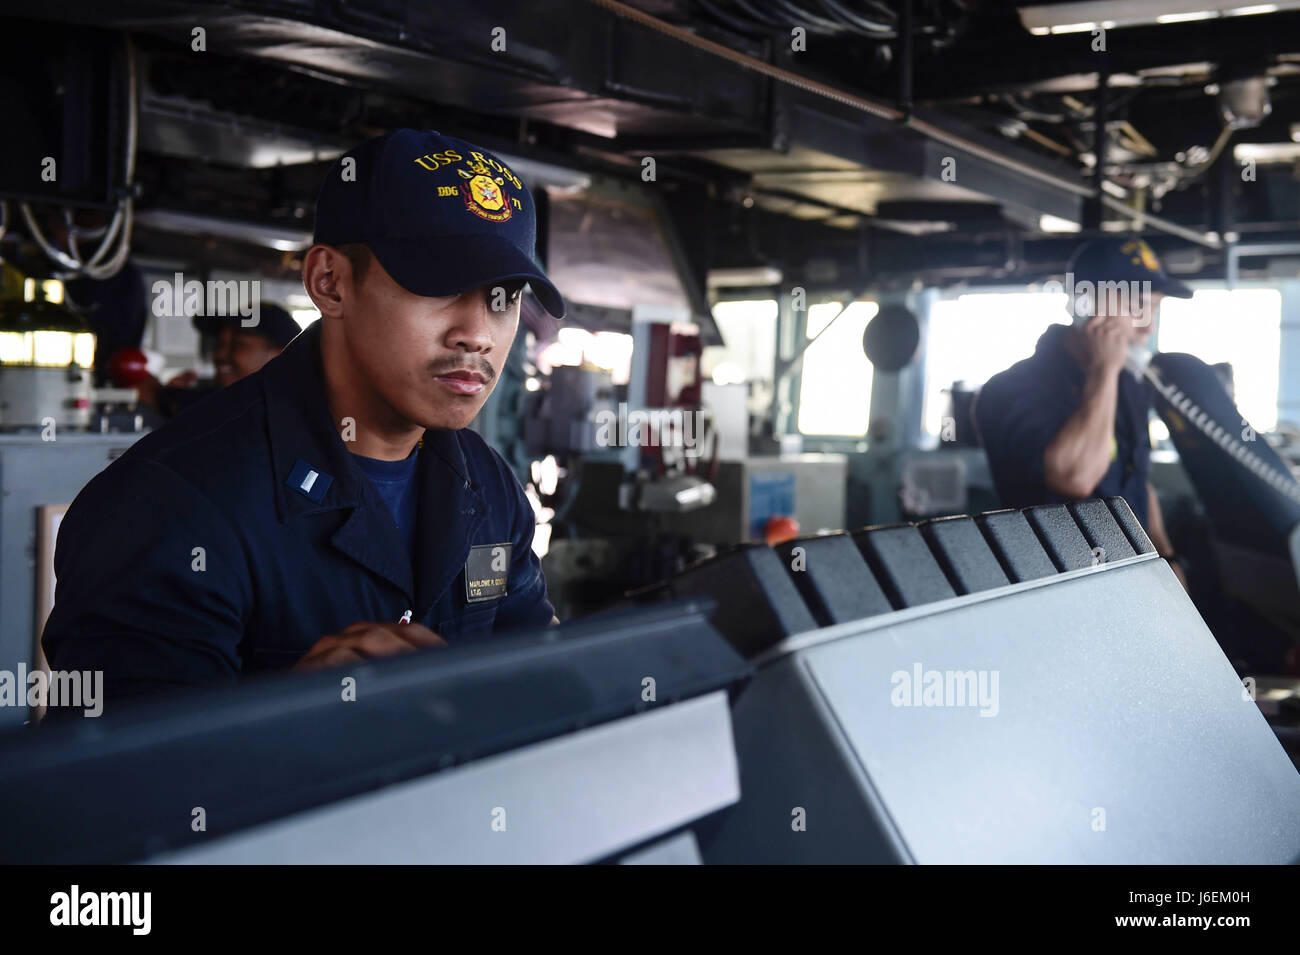 160823-N-FP878-092 MEDITERRANEAN SEA (Aug. 23, 2016) Lt. j.g. Marlowe Gonzales from Yokosuka, Japan, stands bridge watch aboard USS Ross (DDG 71) Aug. 23, 2016.  Ross, an Arleigh Burke-class guided-missile destroyer, forward-deployed to Rota, Spain, is conducting naval operations in the U.S. 6th Fleet Area of Operations in support of U.S. national security interests in Europe and Africa. (U.S. Navy photo by Mass Communication Specialist 1st Class Theron J. Godbold/Released) Stock Photo